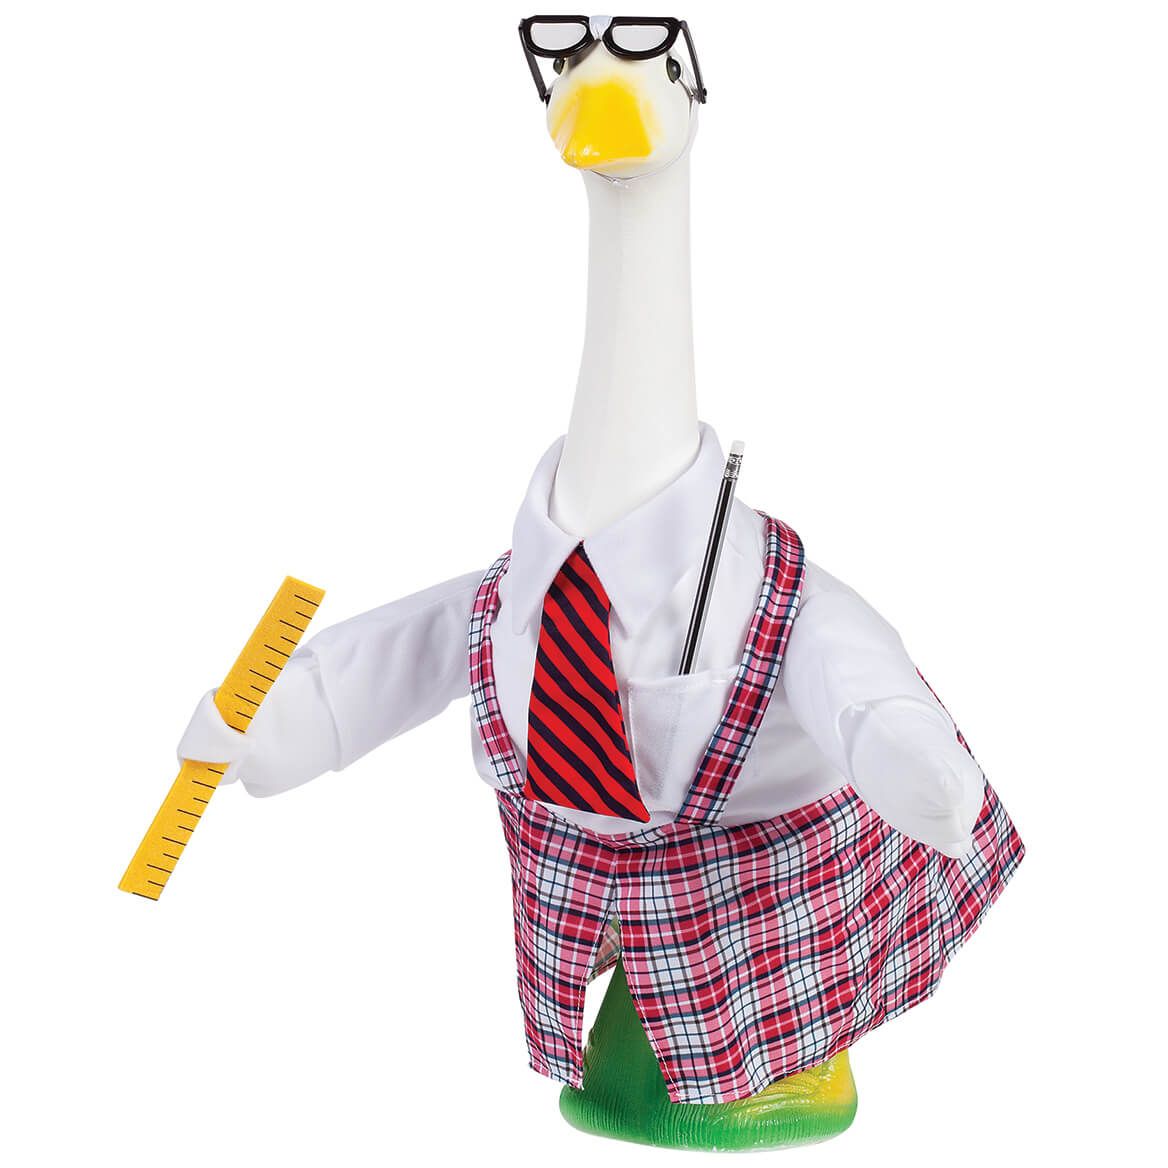 Nerd Goose Outfit by Gaggleville™ + '-' + 376900